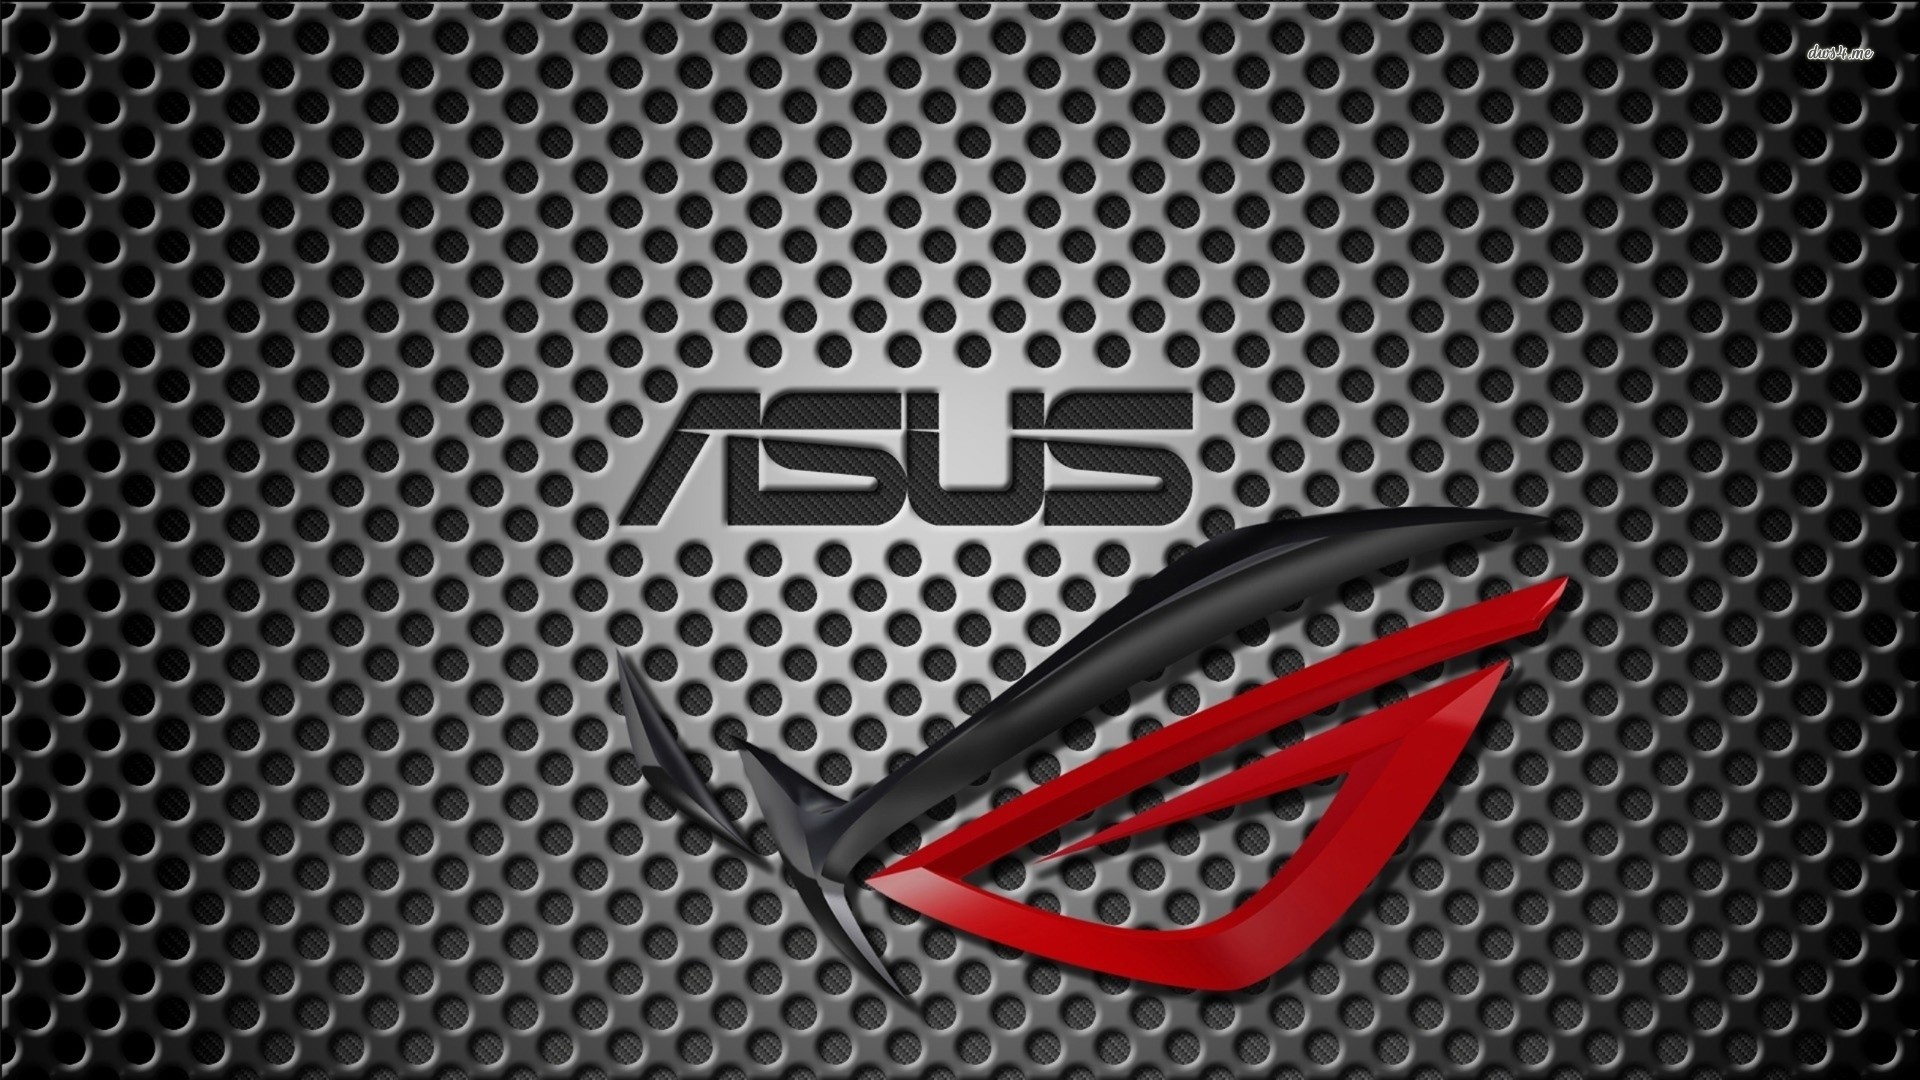 1920x1080 Widescreen Wallpapers of Asus Tablet, Cool Photo